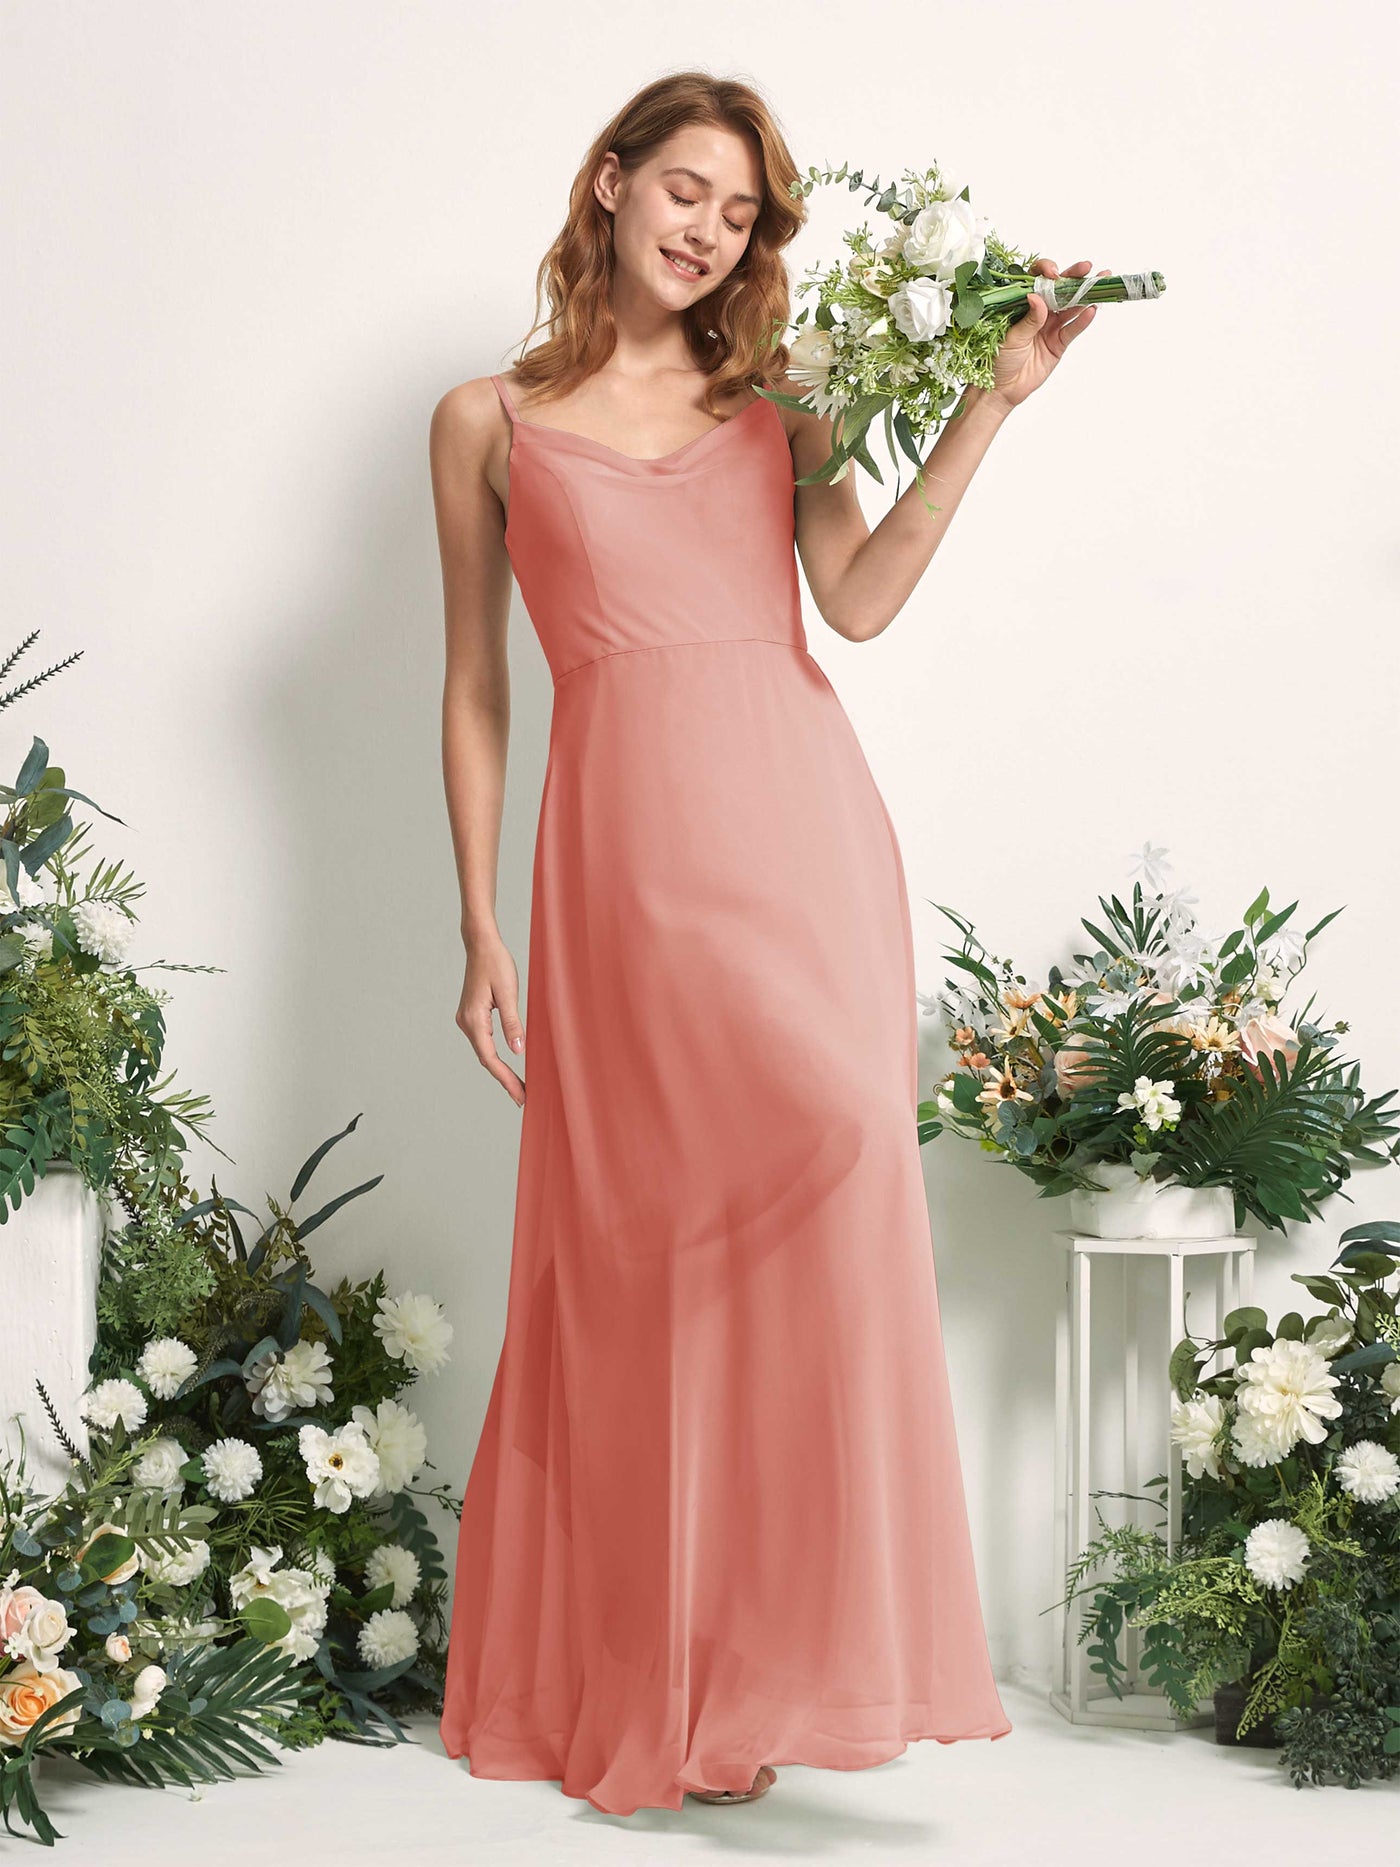 Bridesmaid Dress A-line Chiffon Spaghetti-straps Full Length Sleeveless Wedding Party Dress - Champagne Rose (81227206)#color_champagne-rose